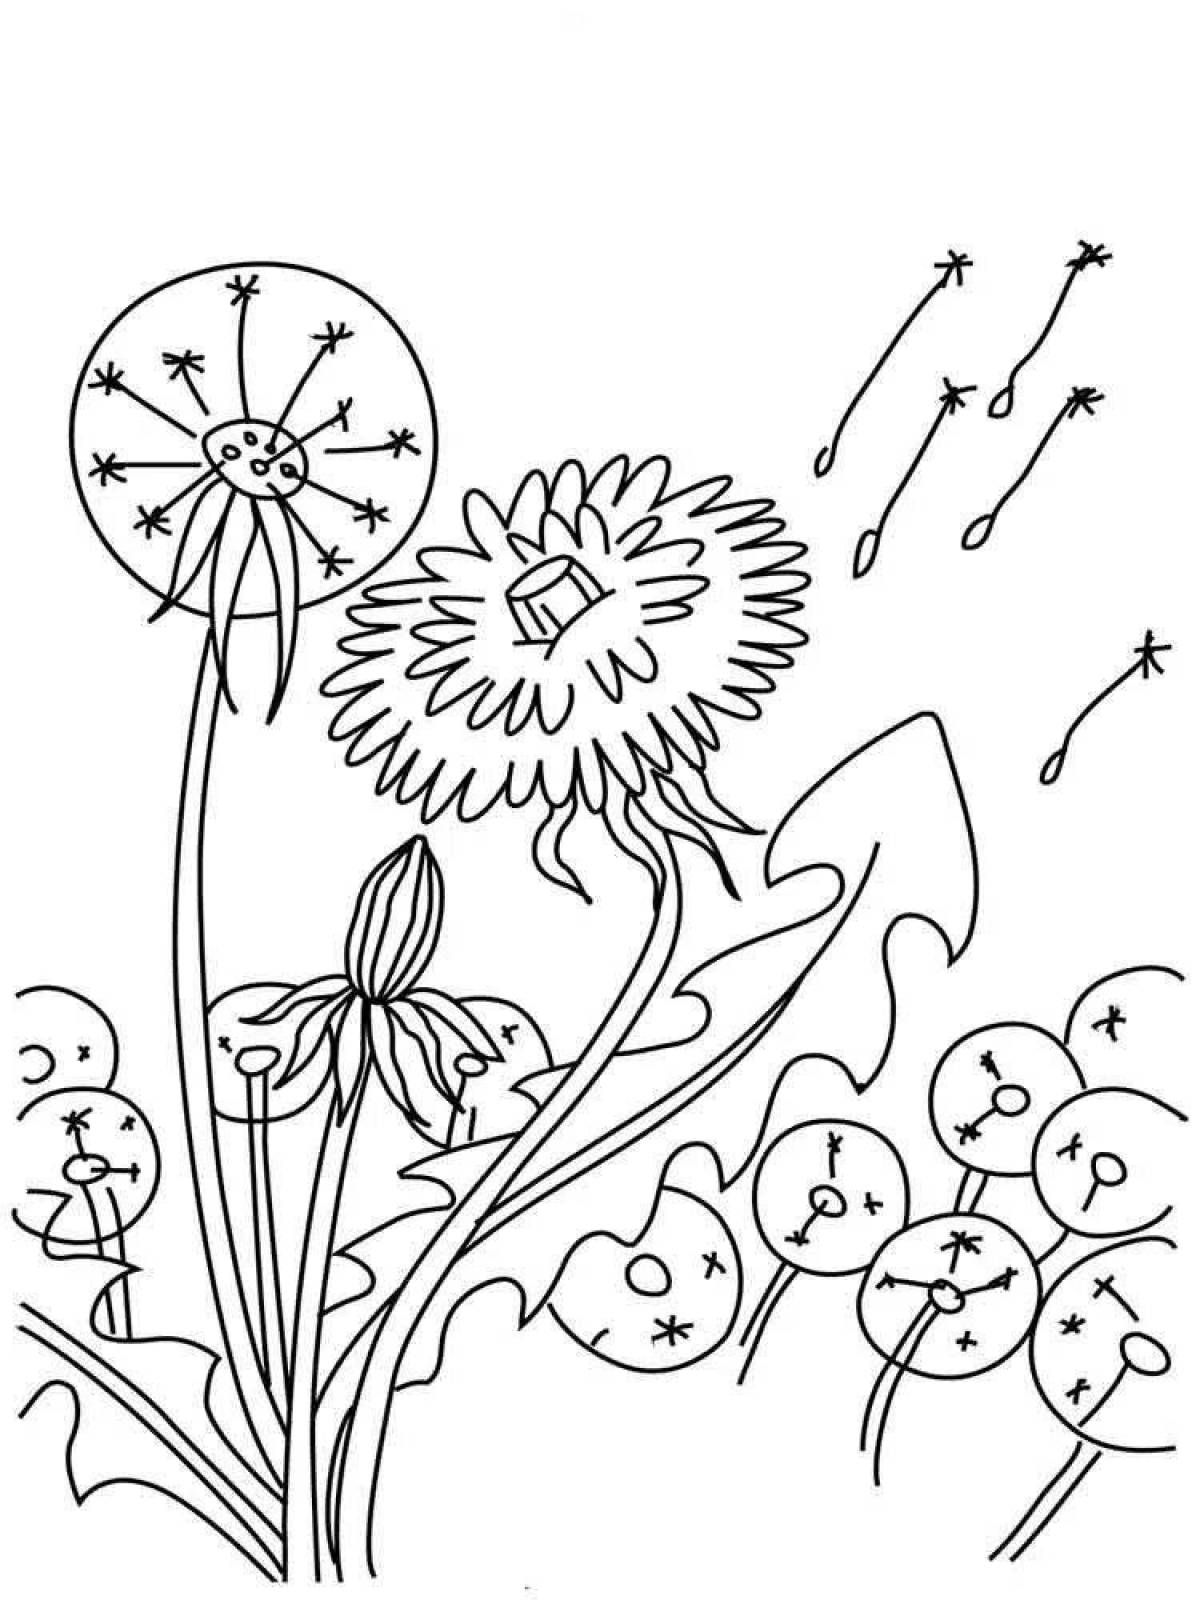 Glowing meadow coloring page